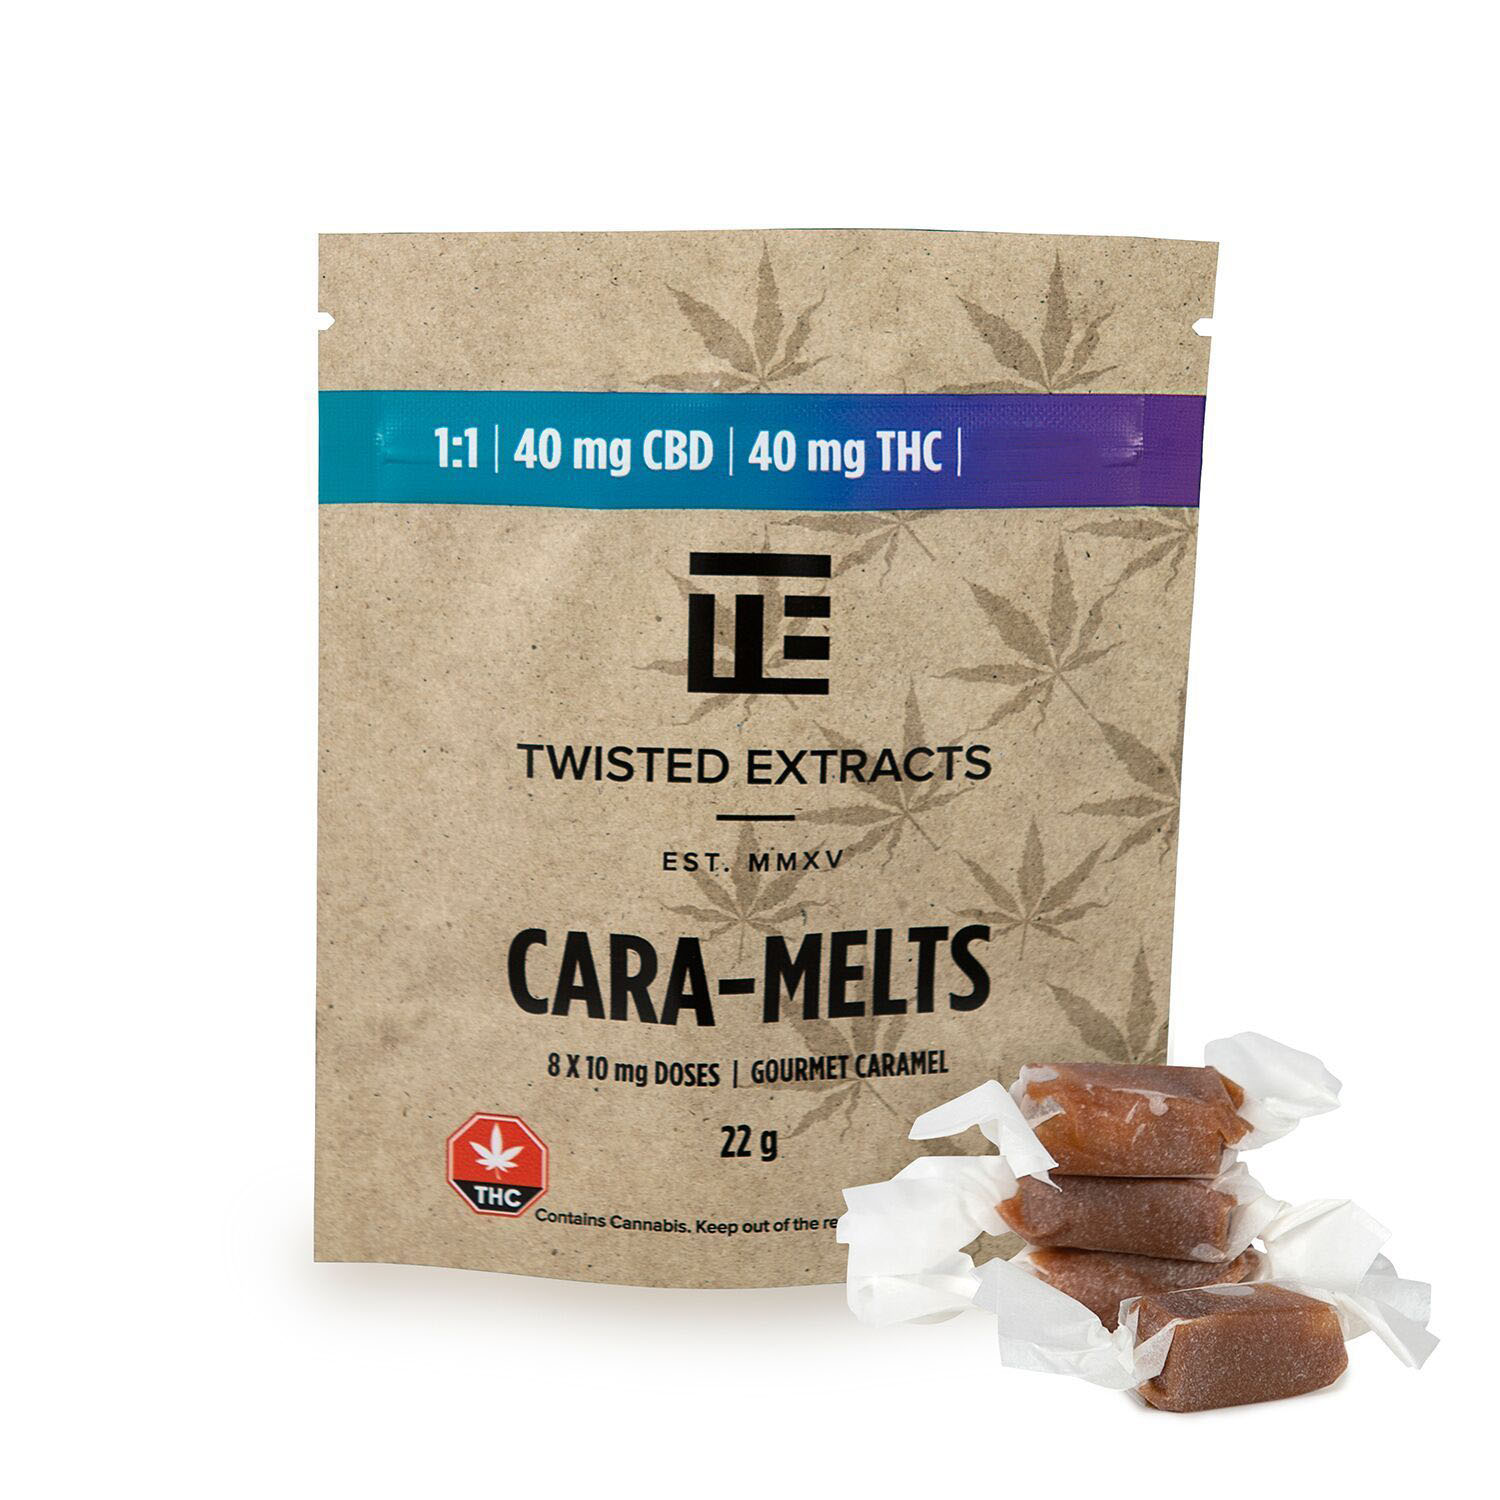 Twisted Extracts- 1:1 – Cara-Melts